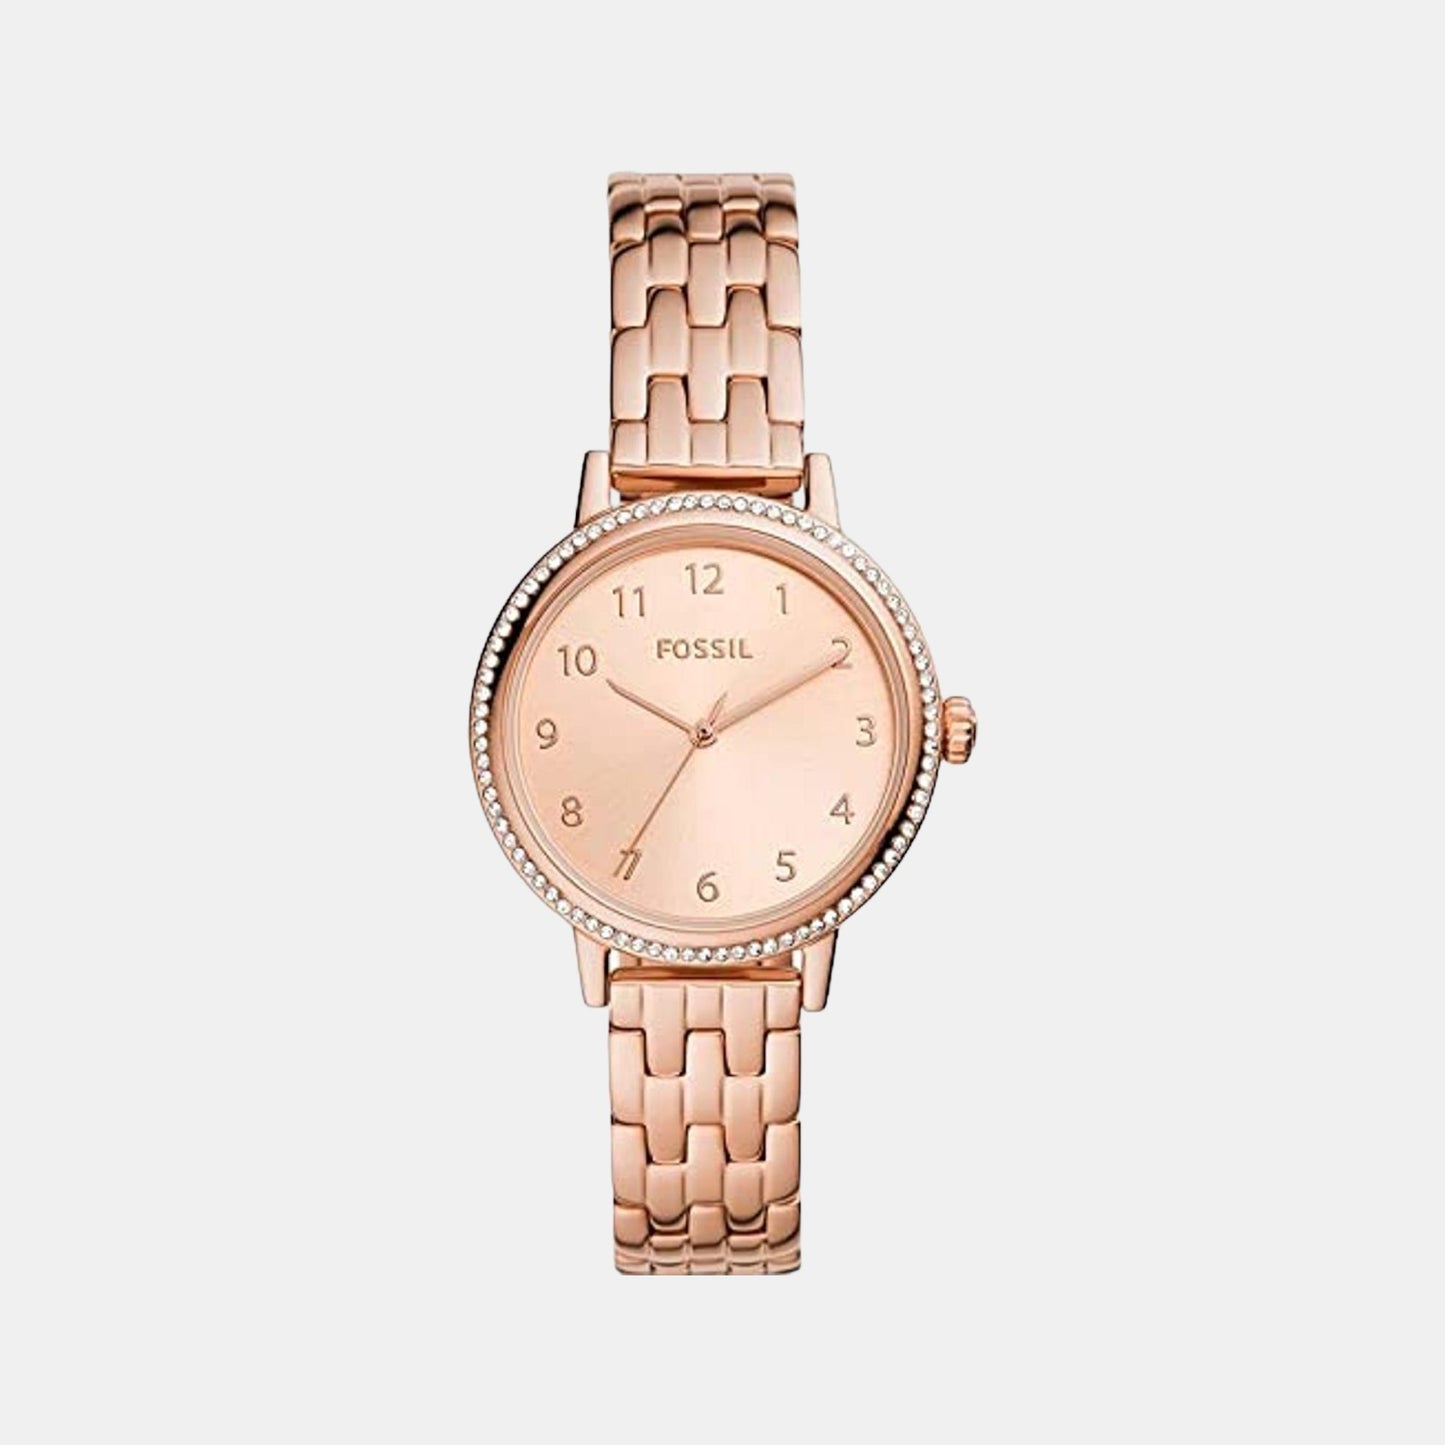 Female Rose Gold Analog Stainless Steel Watch BQ3656I